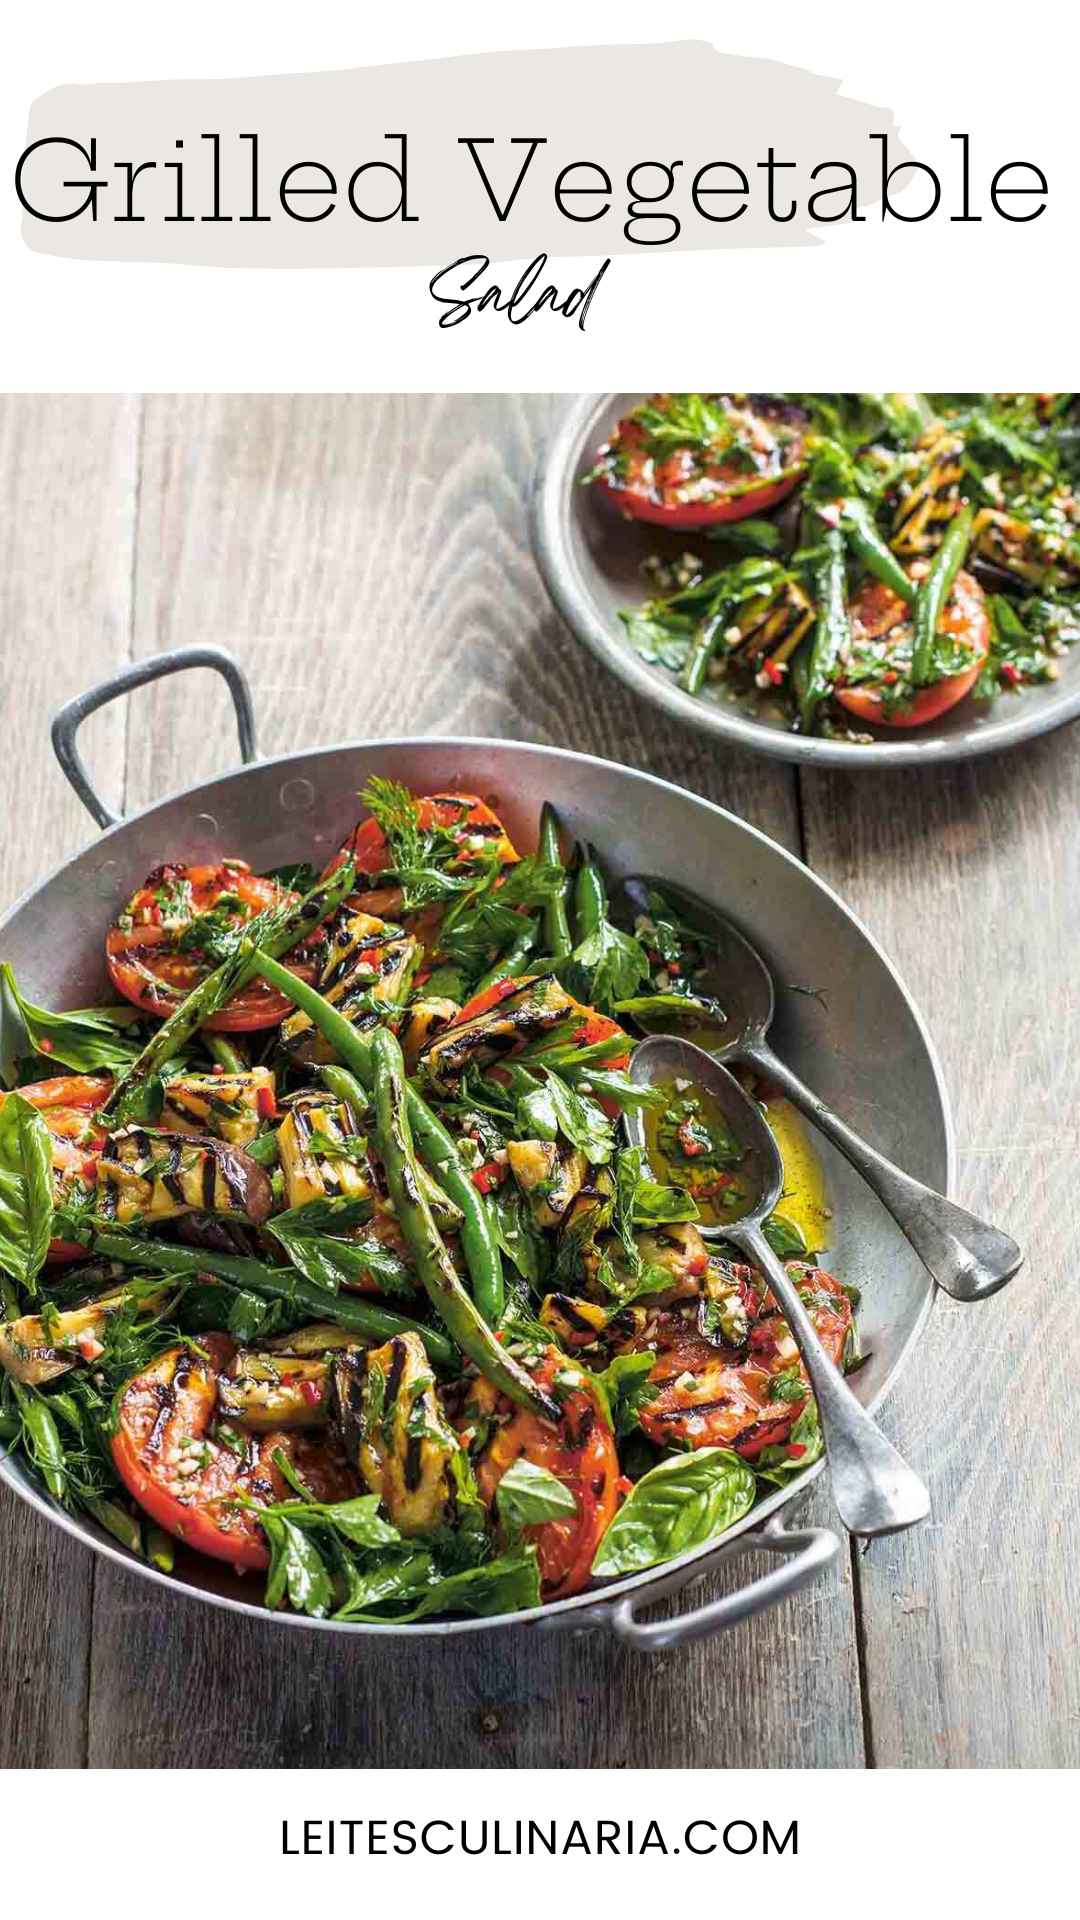 A large metal bowl filled with grilled zucchini, beans, tomatoes, and fresh basil.